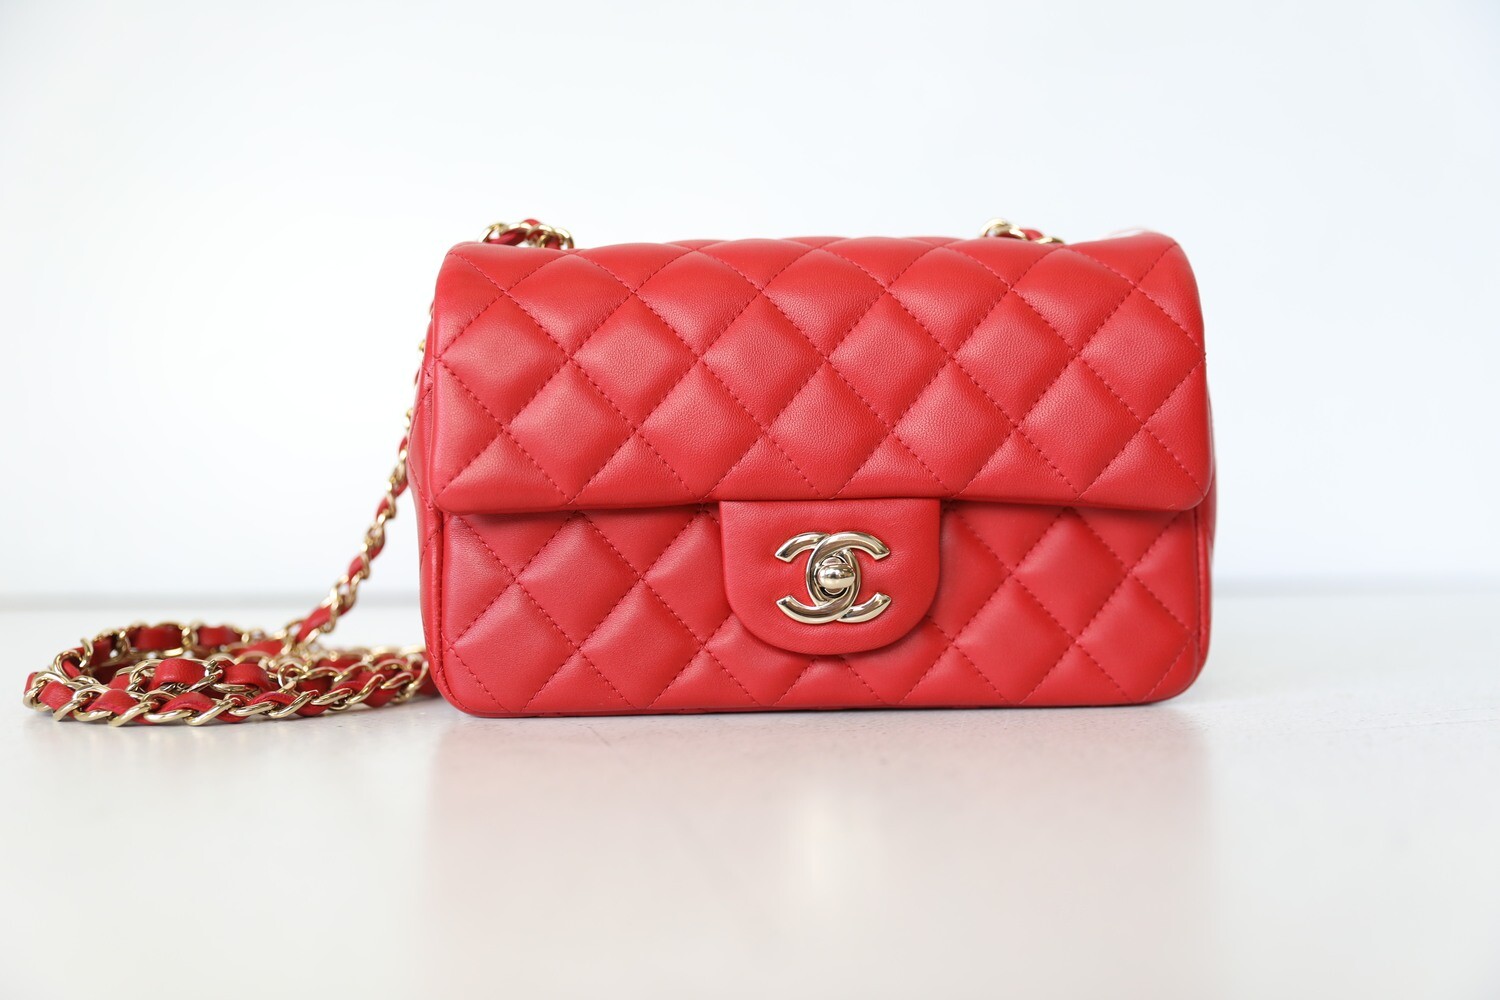 Preowned Chanel - Classic Mini Flap Metallic Gold Quilted Leather